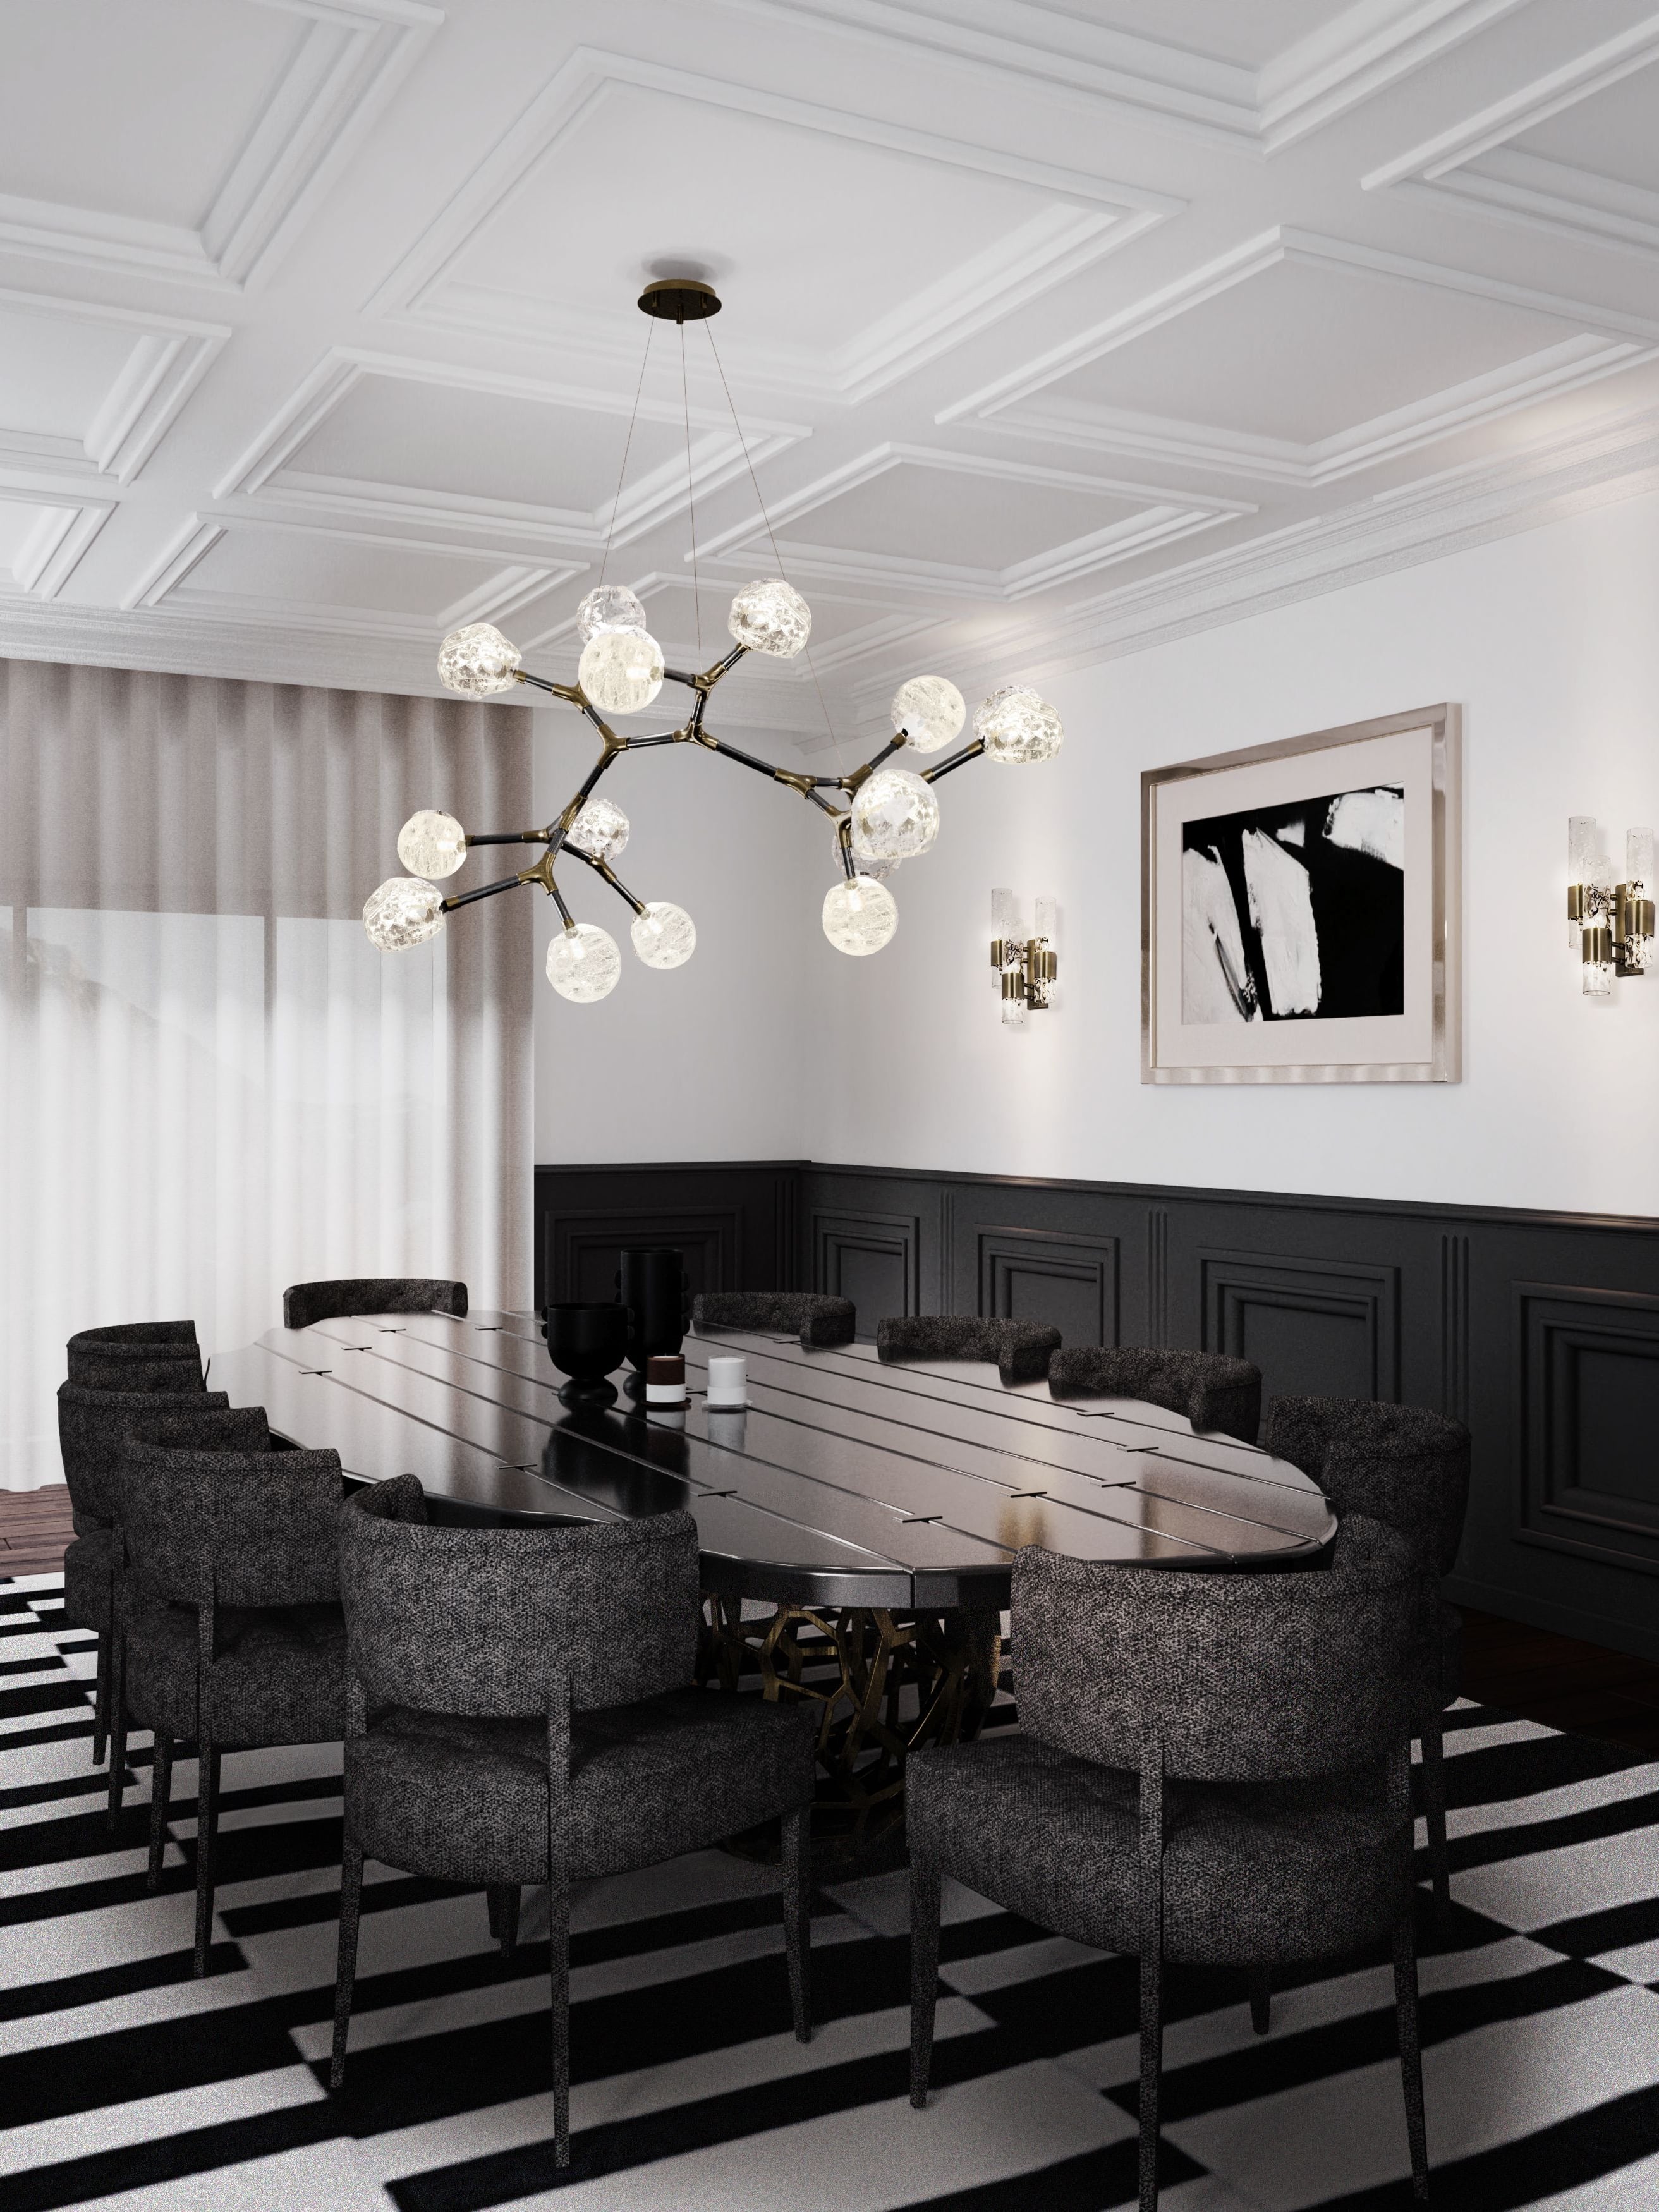 Beautiful Modern Dining Room Design With Black and White Tones - Home'Society